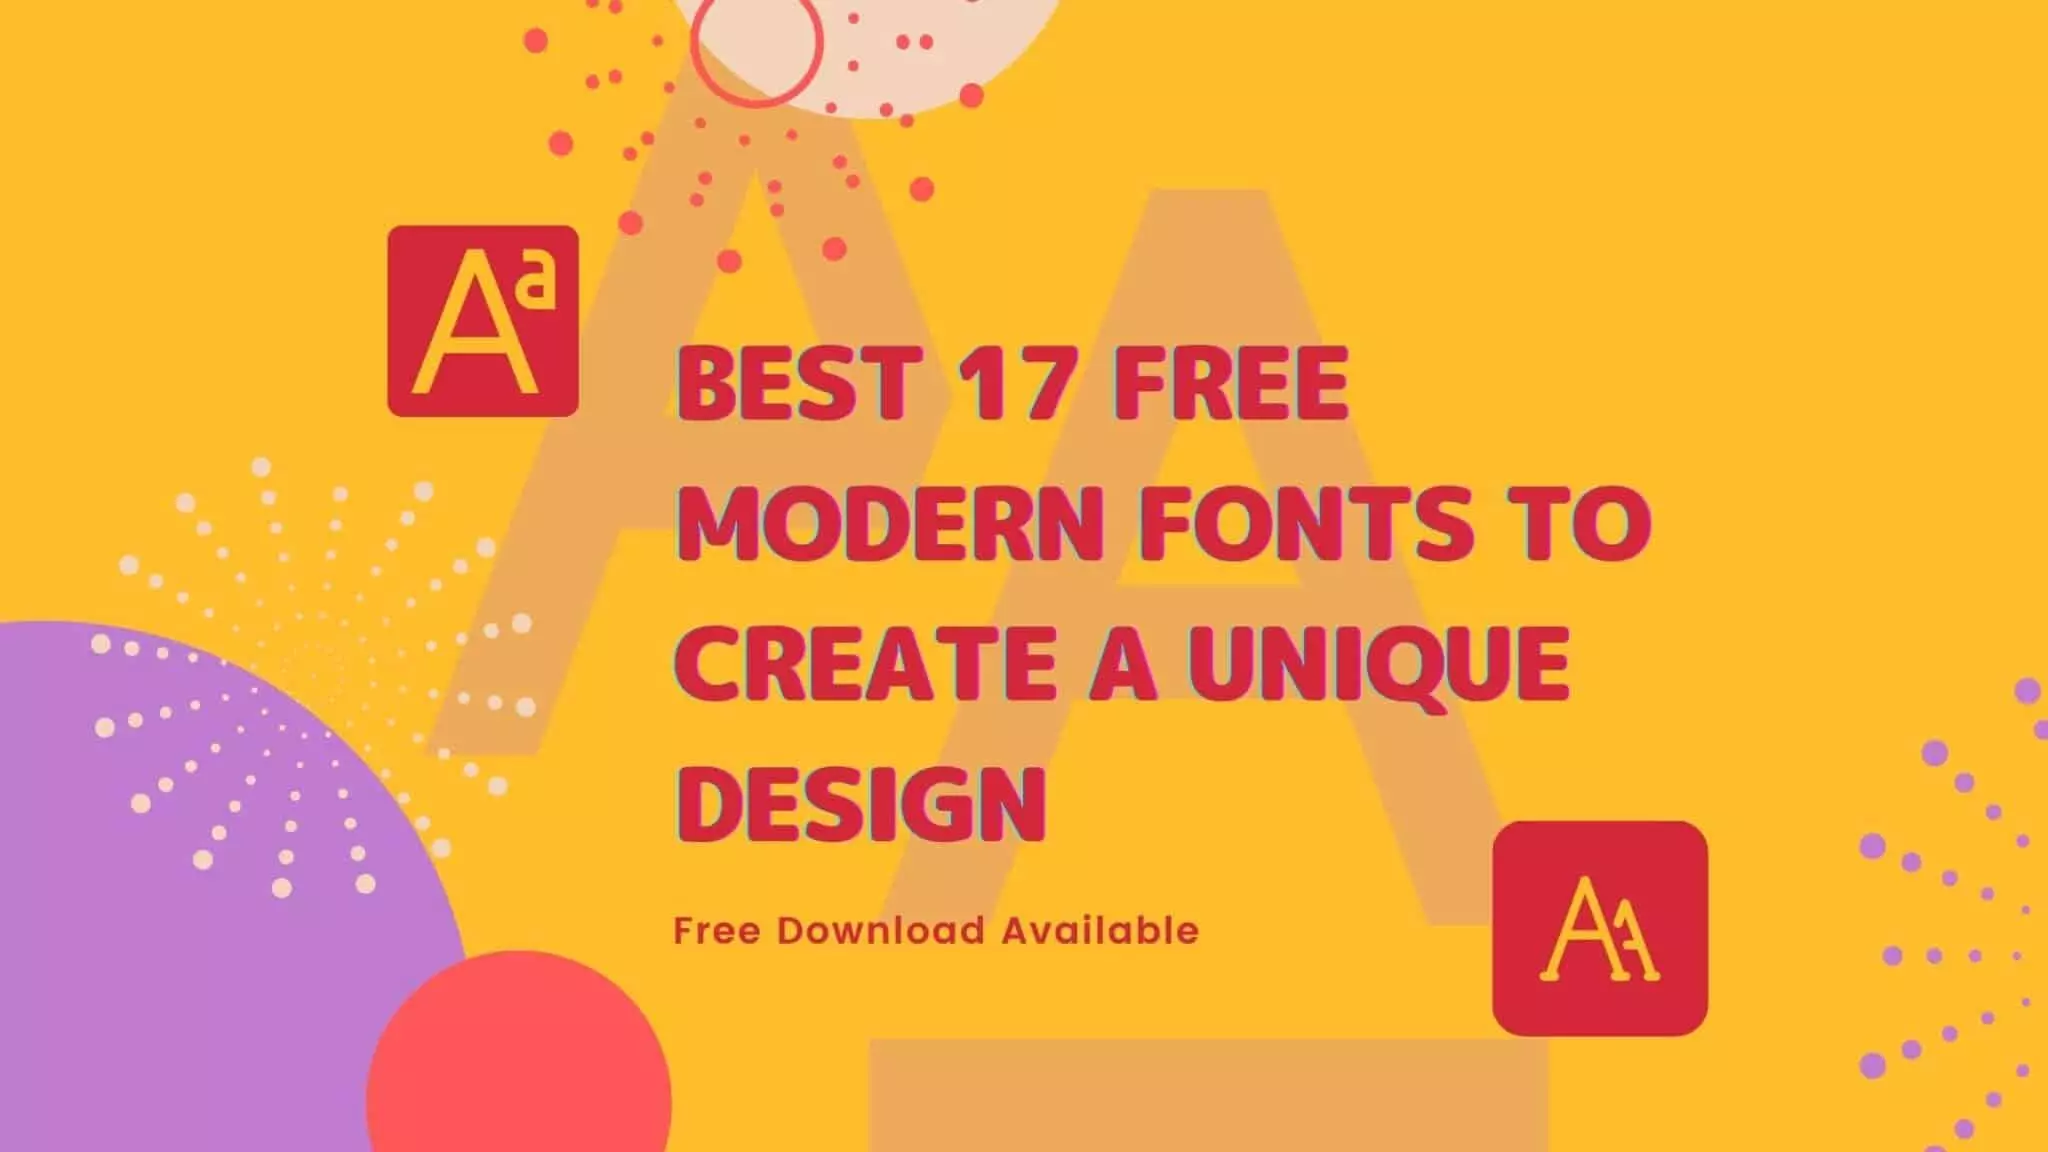 Best 17 Free Modern Fonts to Create a unique Design